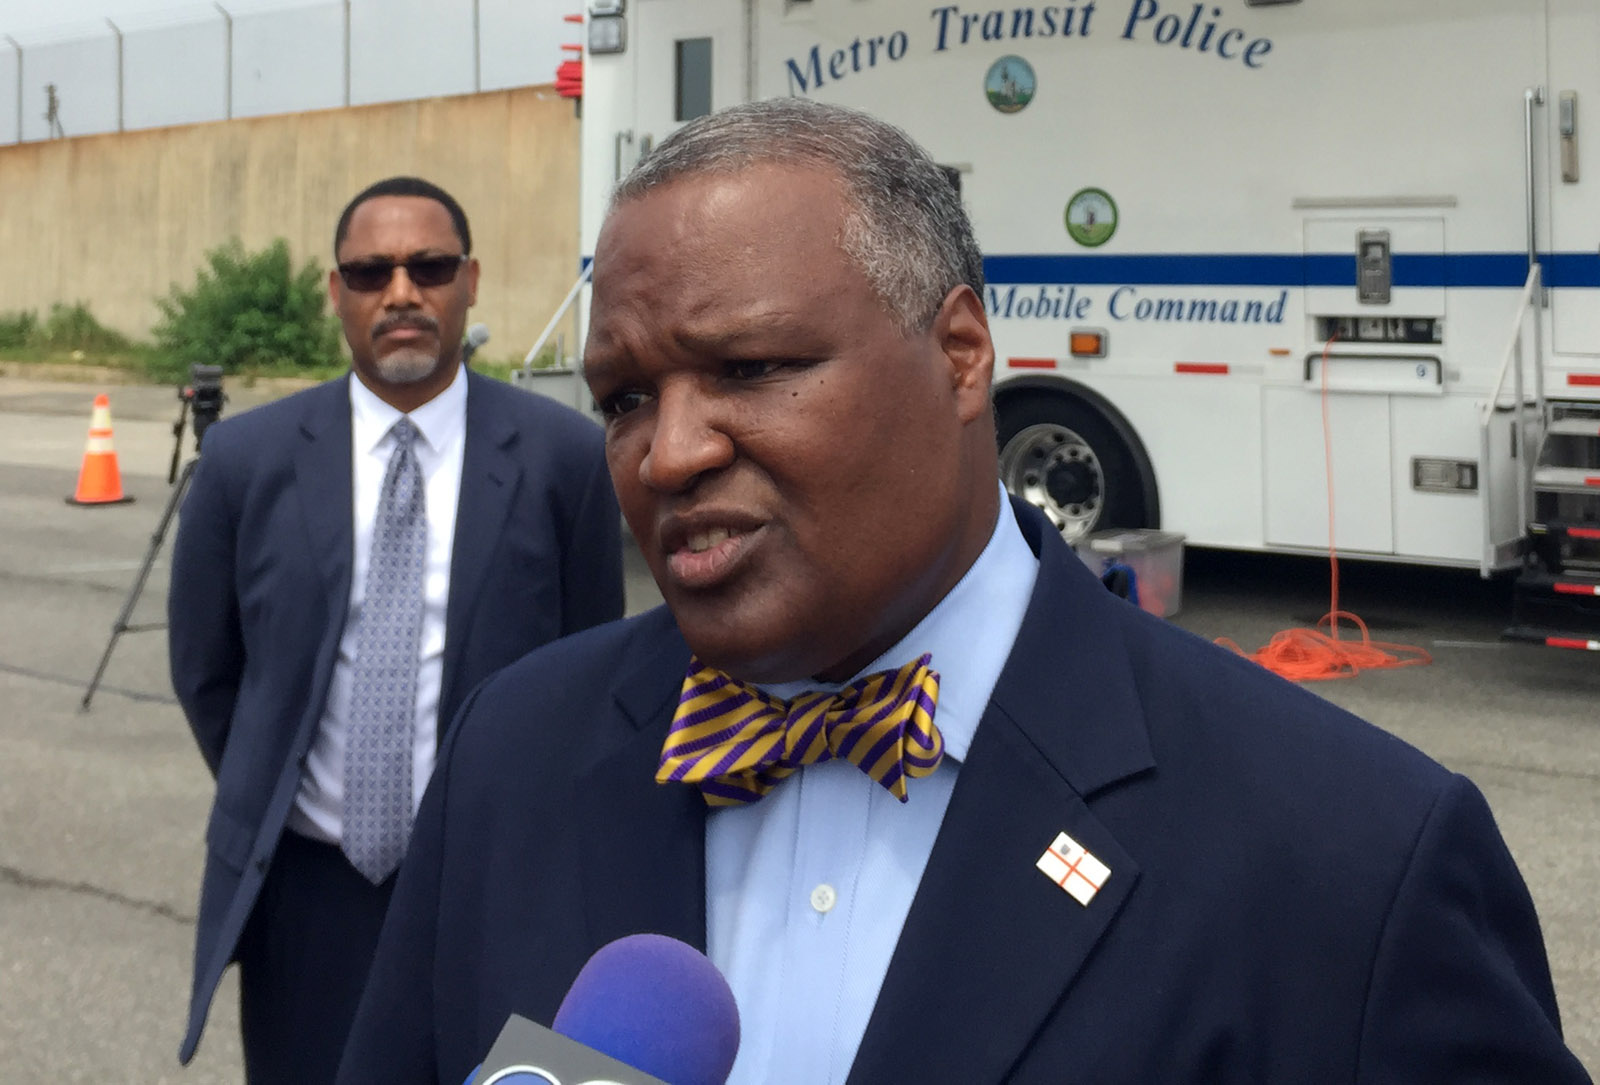 Prince George's County Executive Rushern Baker says that the state of Maryland is not doing enough to help Maryland commuters navigate around a planned Metro track shutdown that will cut off parts of the county from downtown D.C. Baker spoke during an event to reminder commuters about the two-week shutdown and what alternative options are available on Thursday, June 16, 2016. (WTOP/Max Smith)